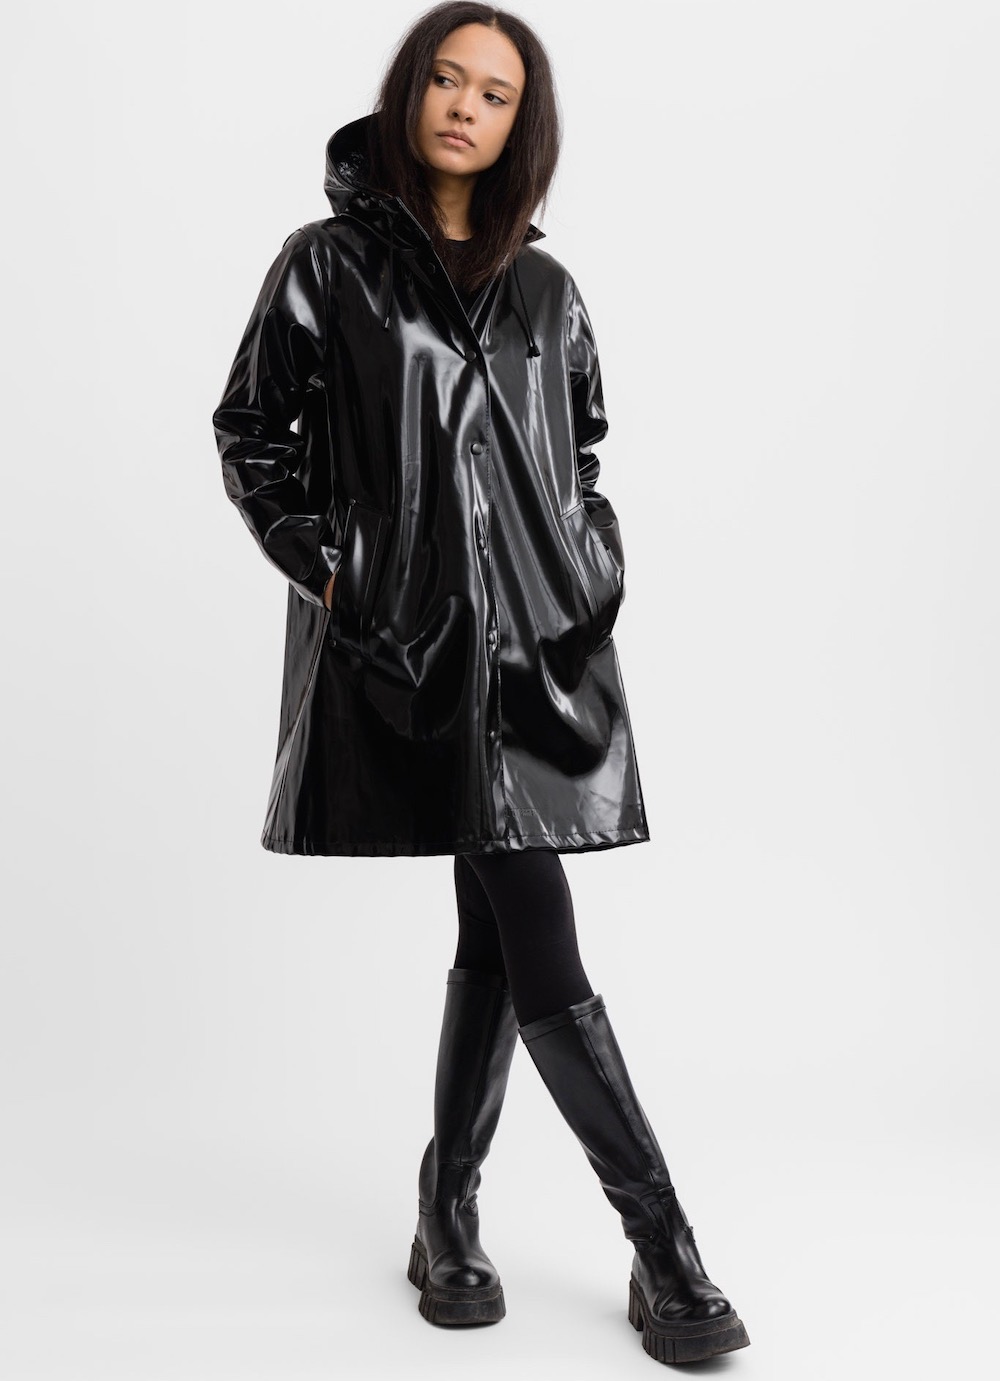 Raincoats for Women to Brave Any Storm in Style - theFashionSpot